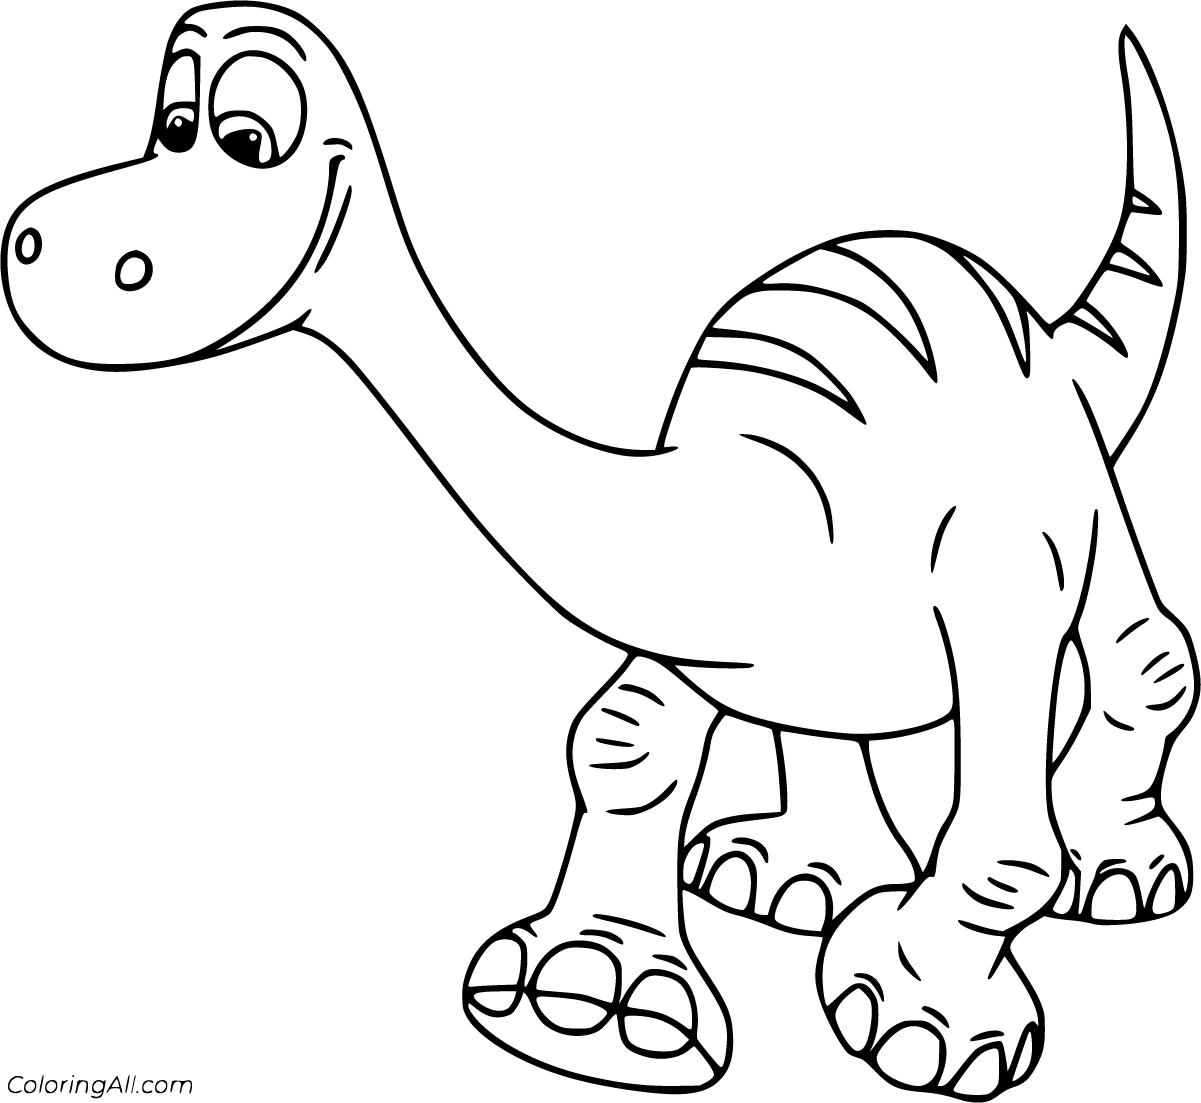 The Good Dinosaur Coloring Pages - ColoringAll